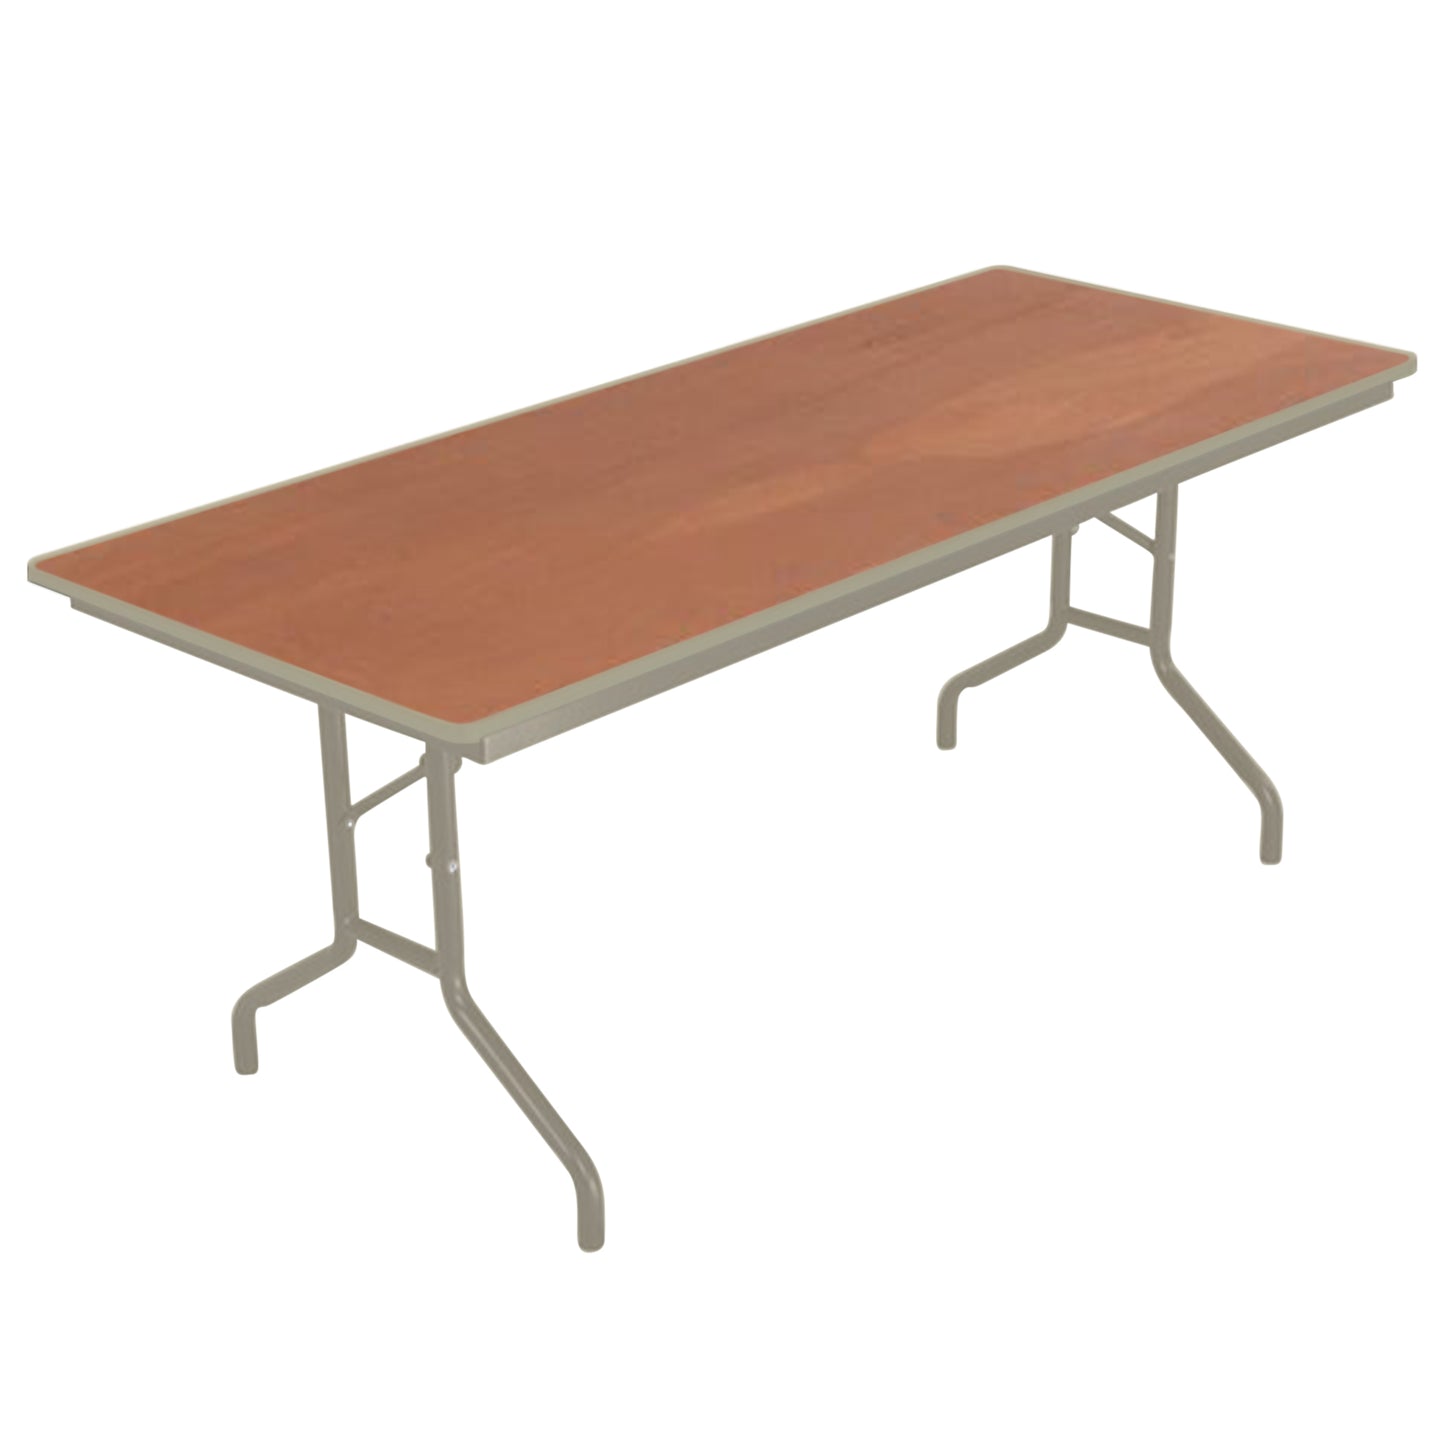 AmTab Folding Table - Plywood Stained and Sealed - Vinyl T-Molding Edge - 18"W x 60"L x 29"H  (AmTab AMT-185PM)